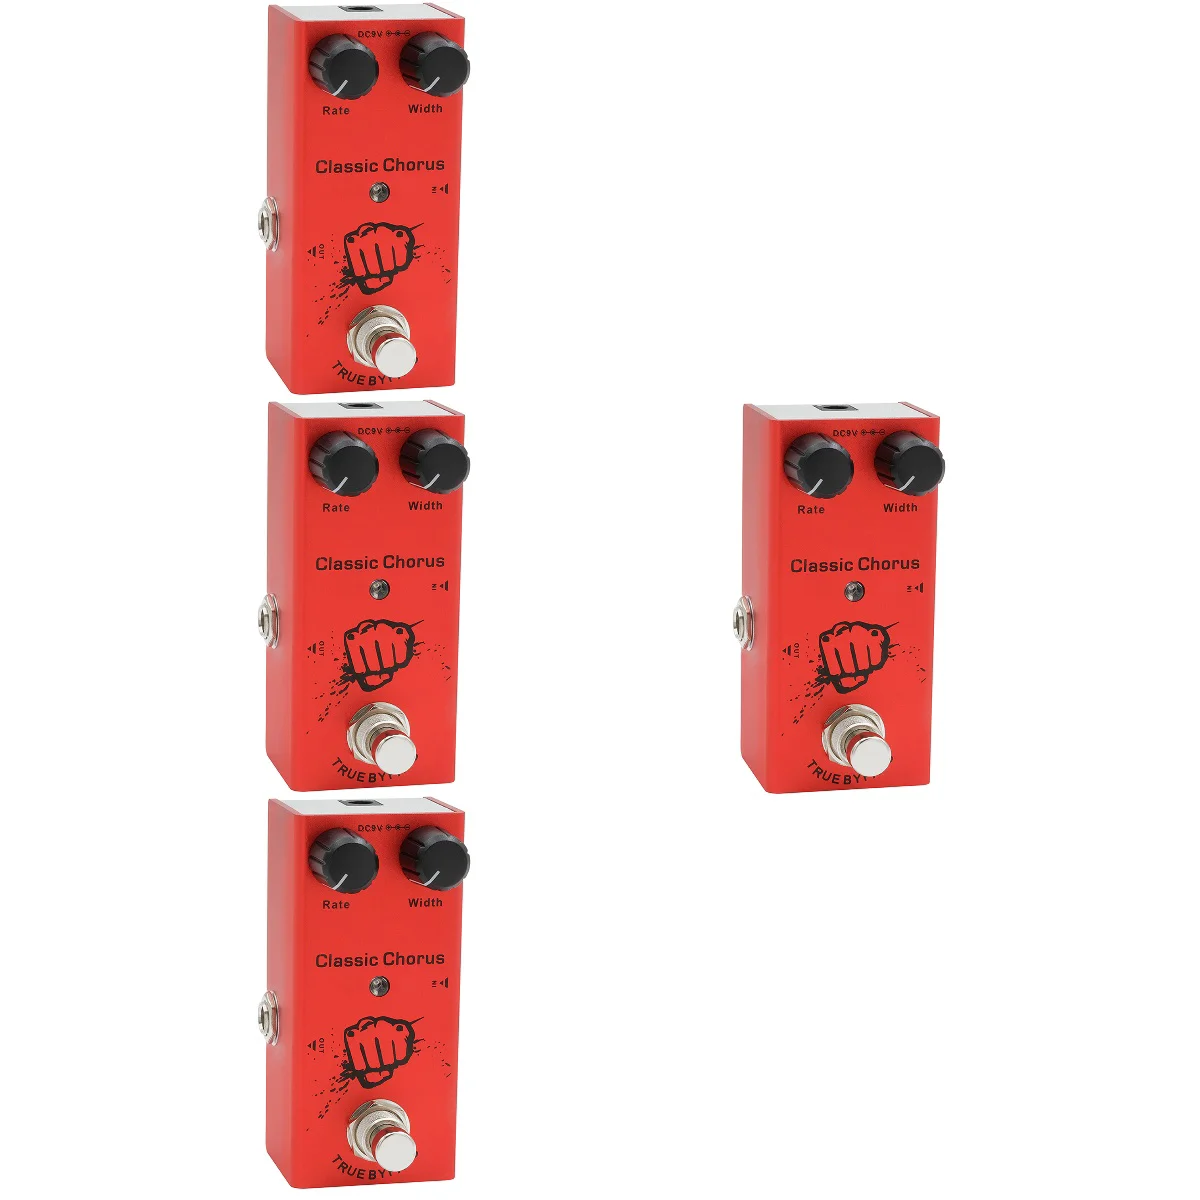 4pcs Delay Electric Guitar Effects Pedal Metal Single Type True Bypass (Classic Chorus) enlarge